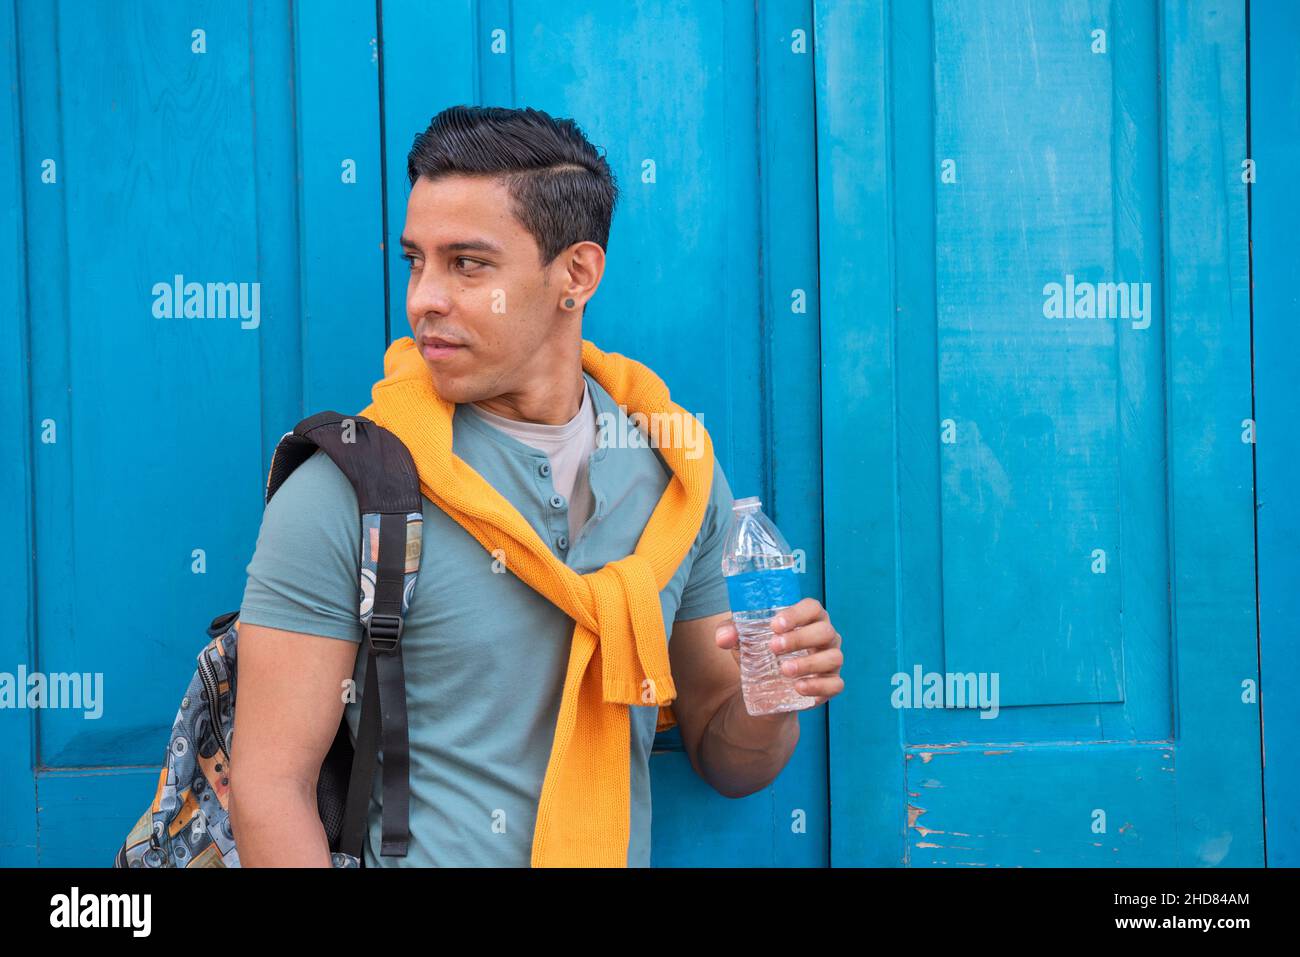 Young hispanic men with a bottle of water, Panama Stock Photo